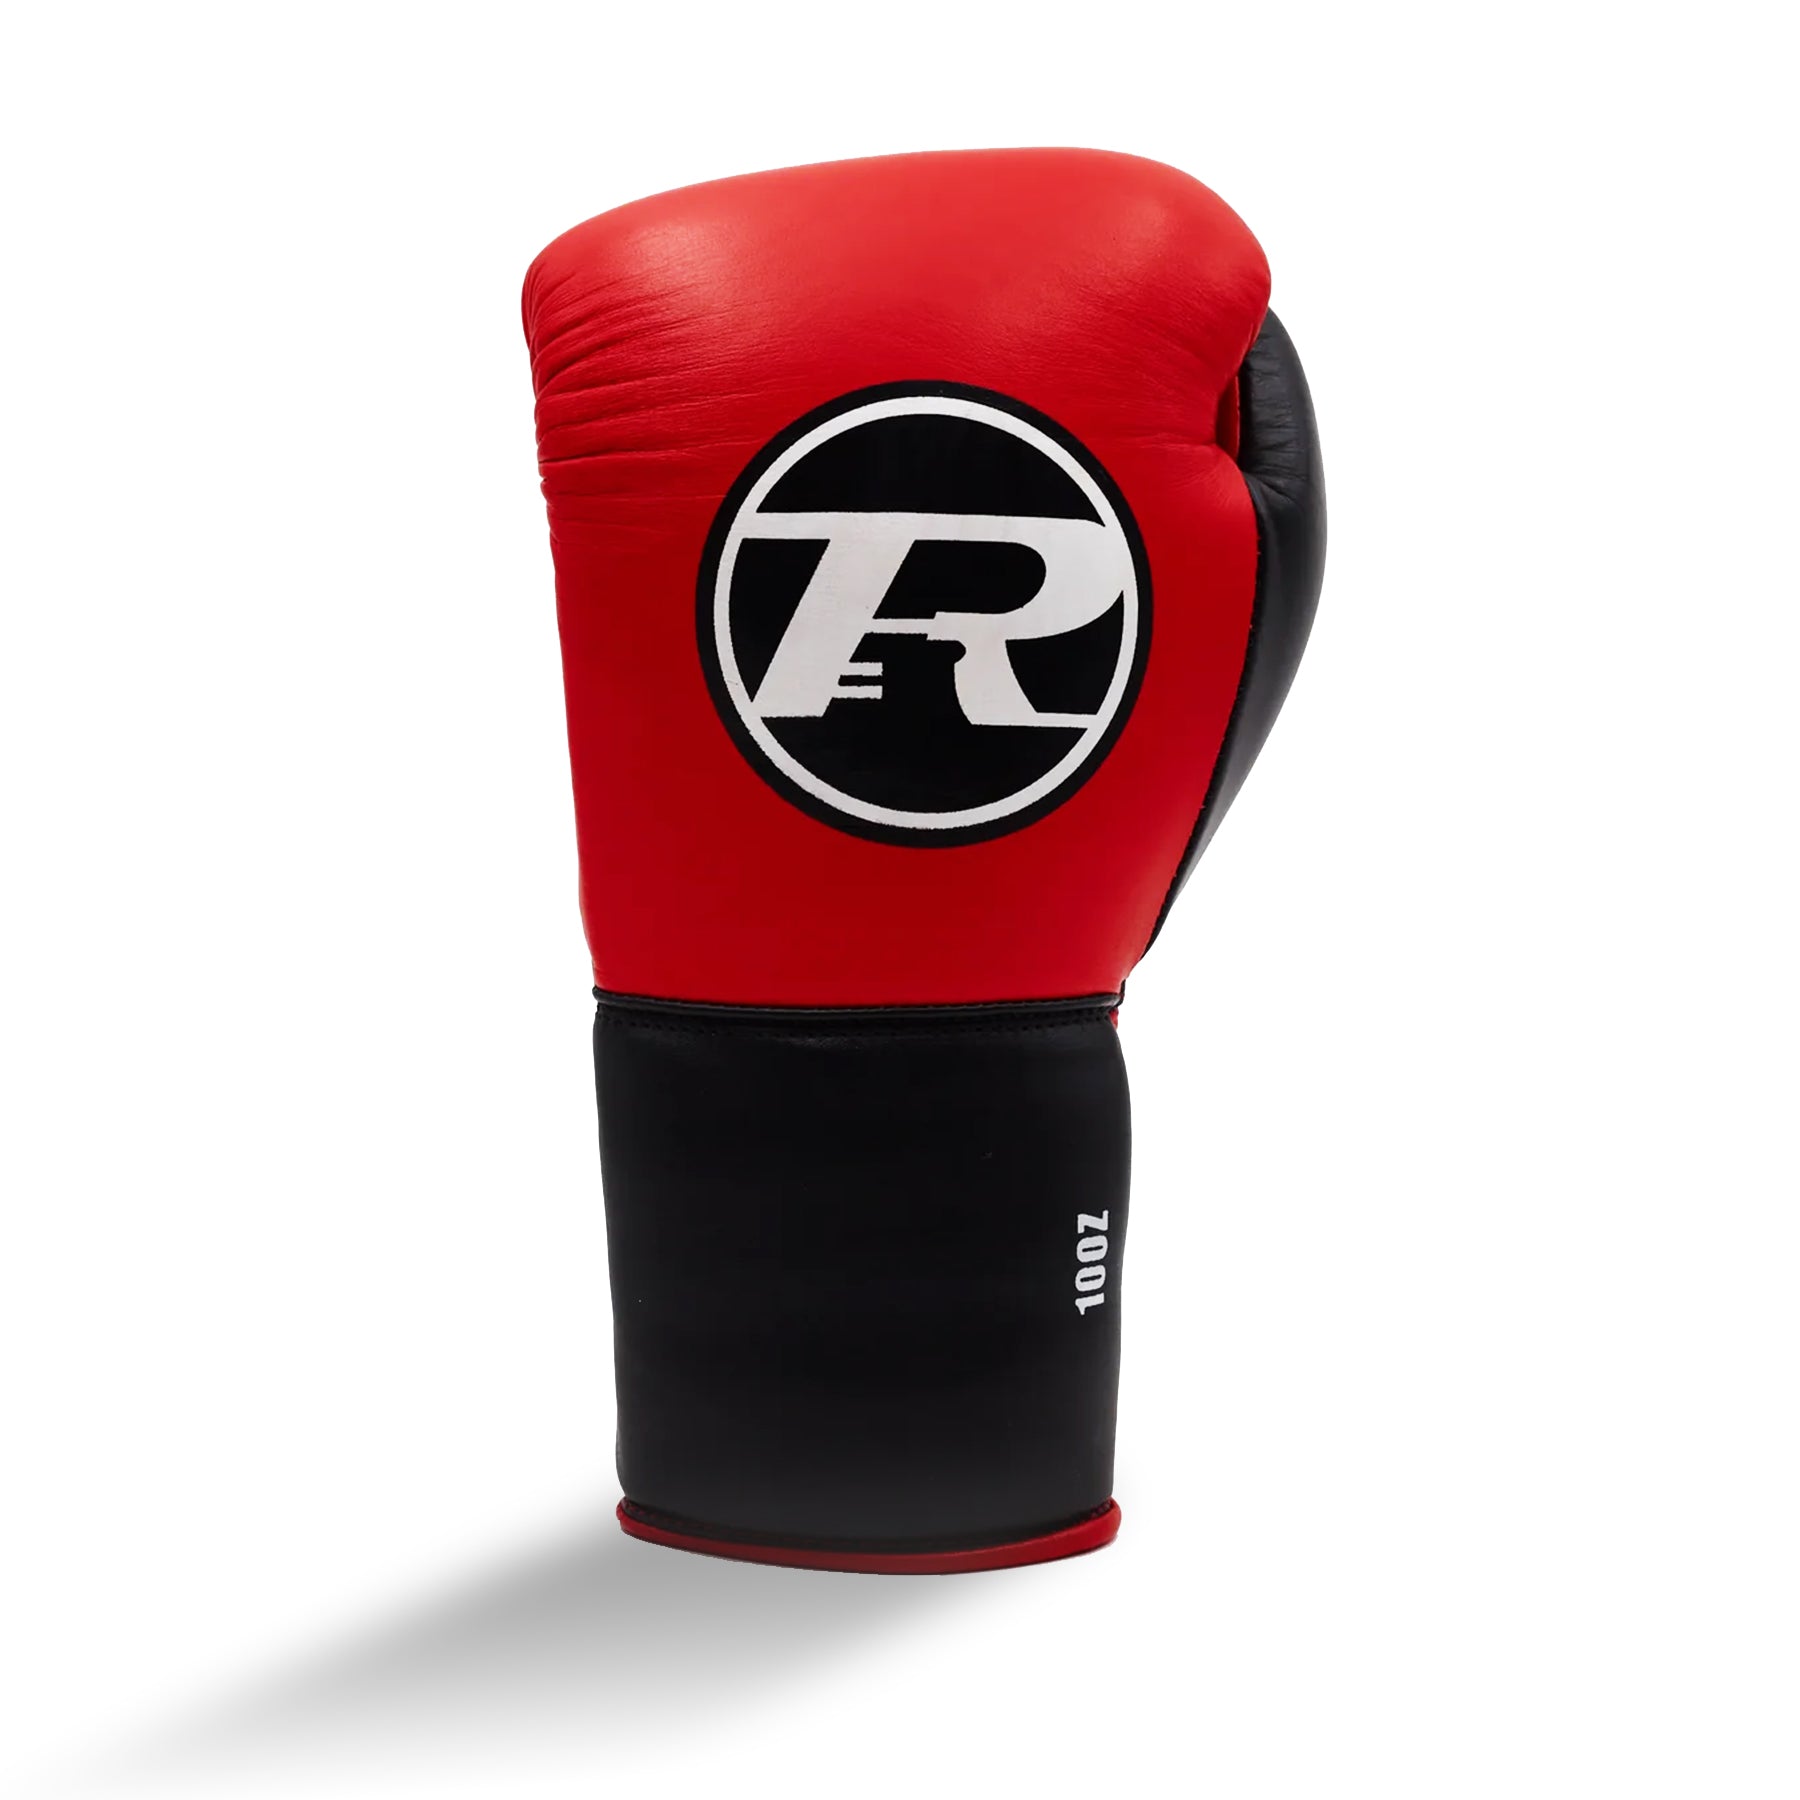 Ringside Boxing UK Pro Contest RS2 Boxing Gloves Red / Black Contest Gloves 